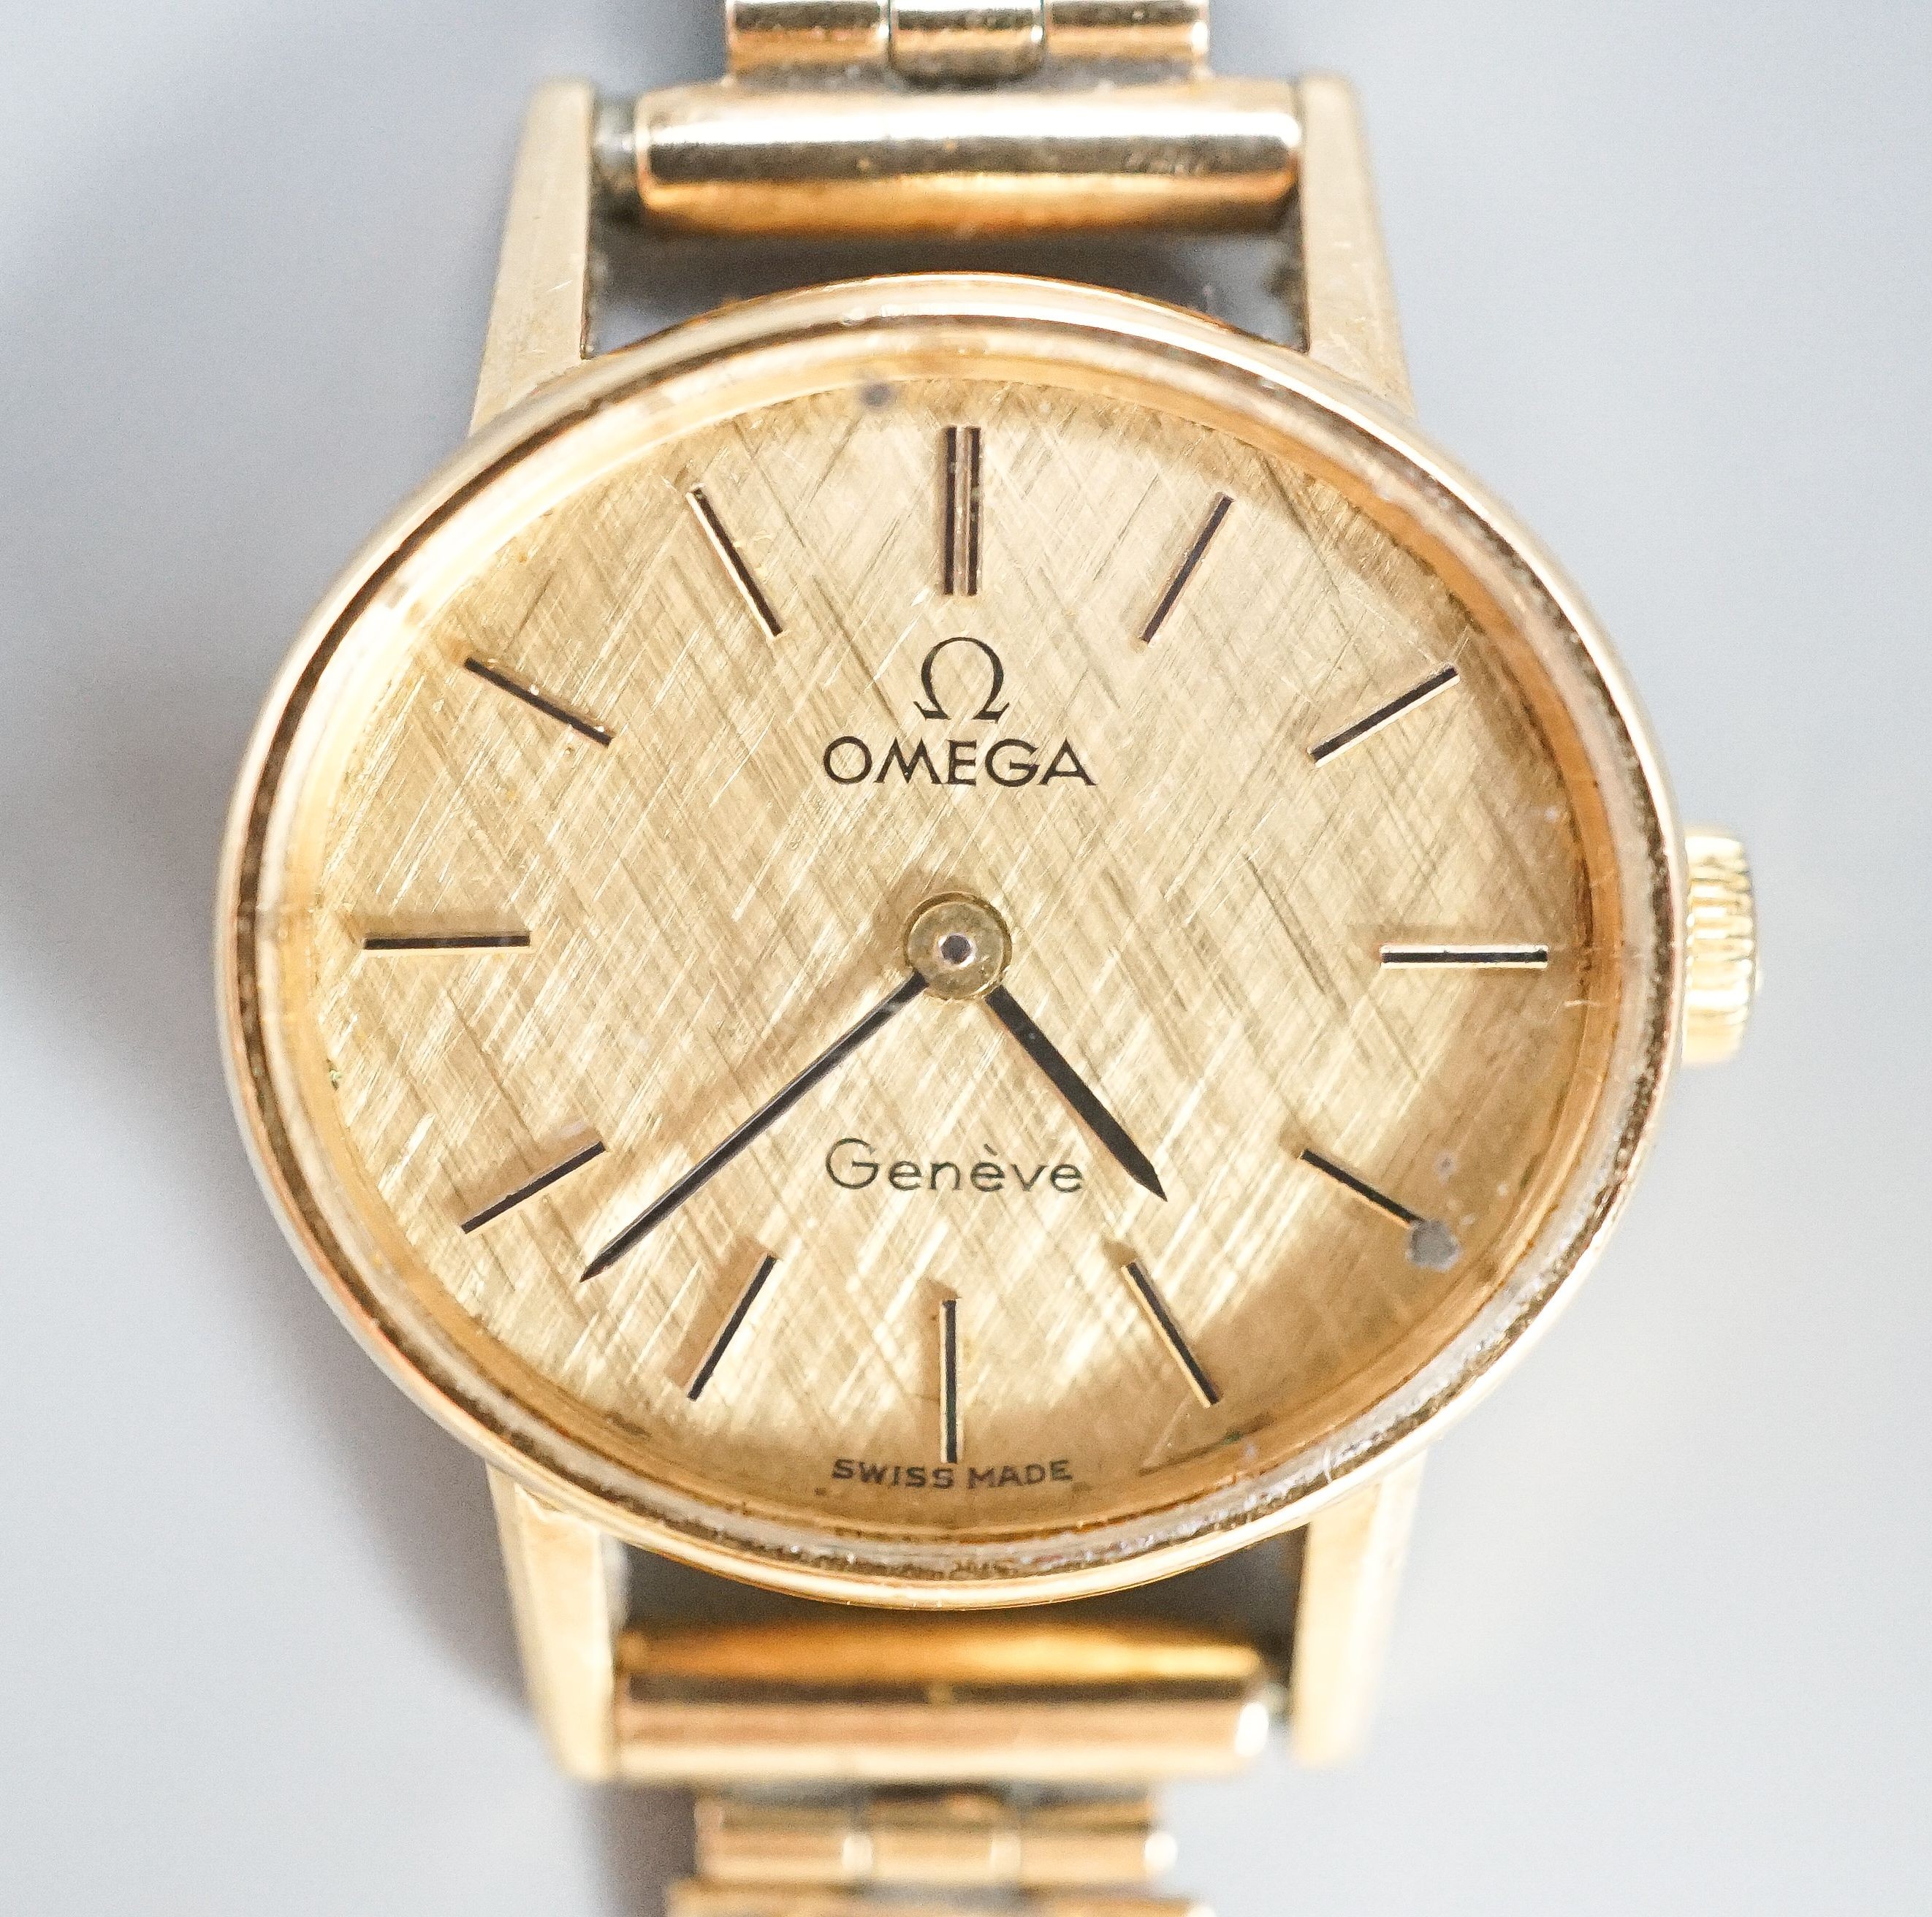 A lady's 1970's 9ct gold Omega manual wind wrist watch, on a 9ct gold bracelet, overall 18.5cm